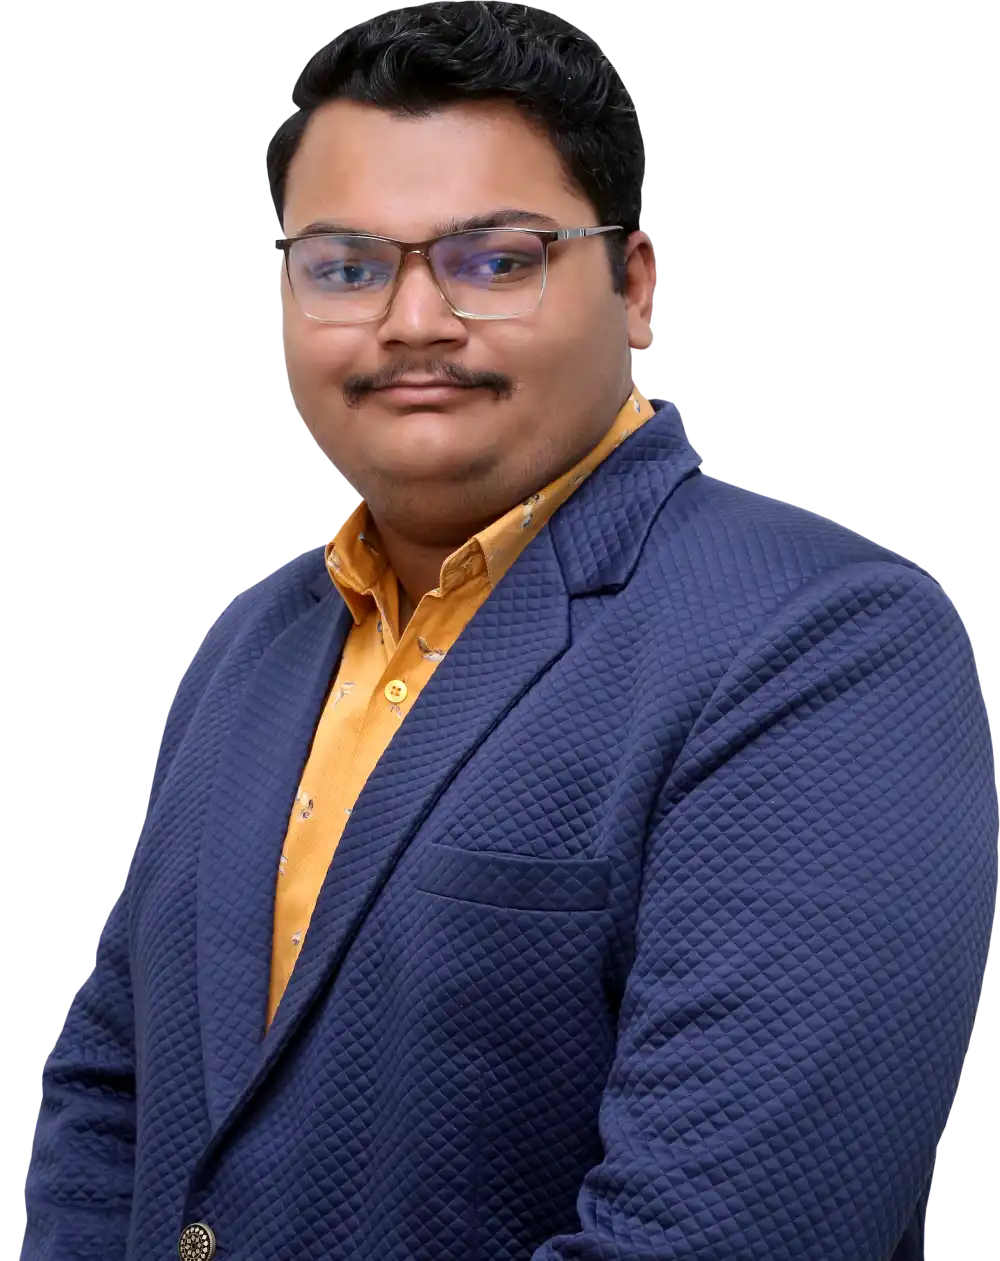 Picture of Our Team Web developer, Siddhraj Chauhan